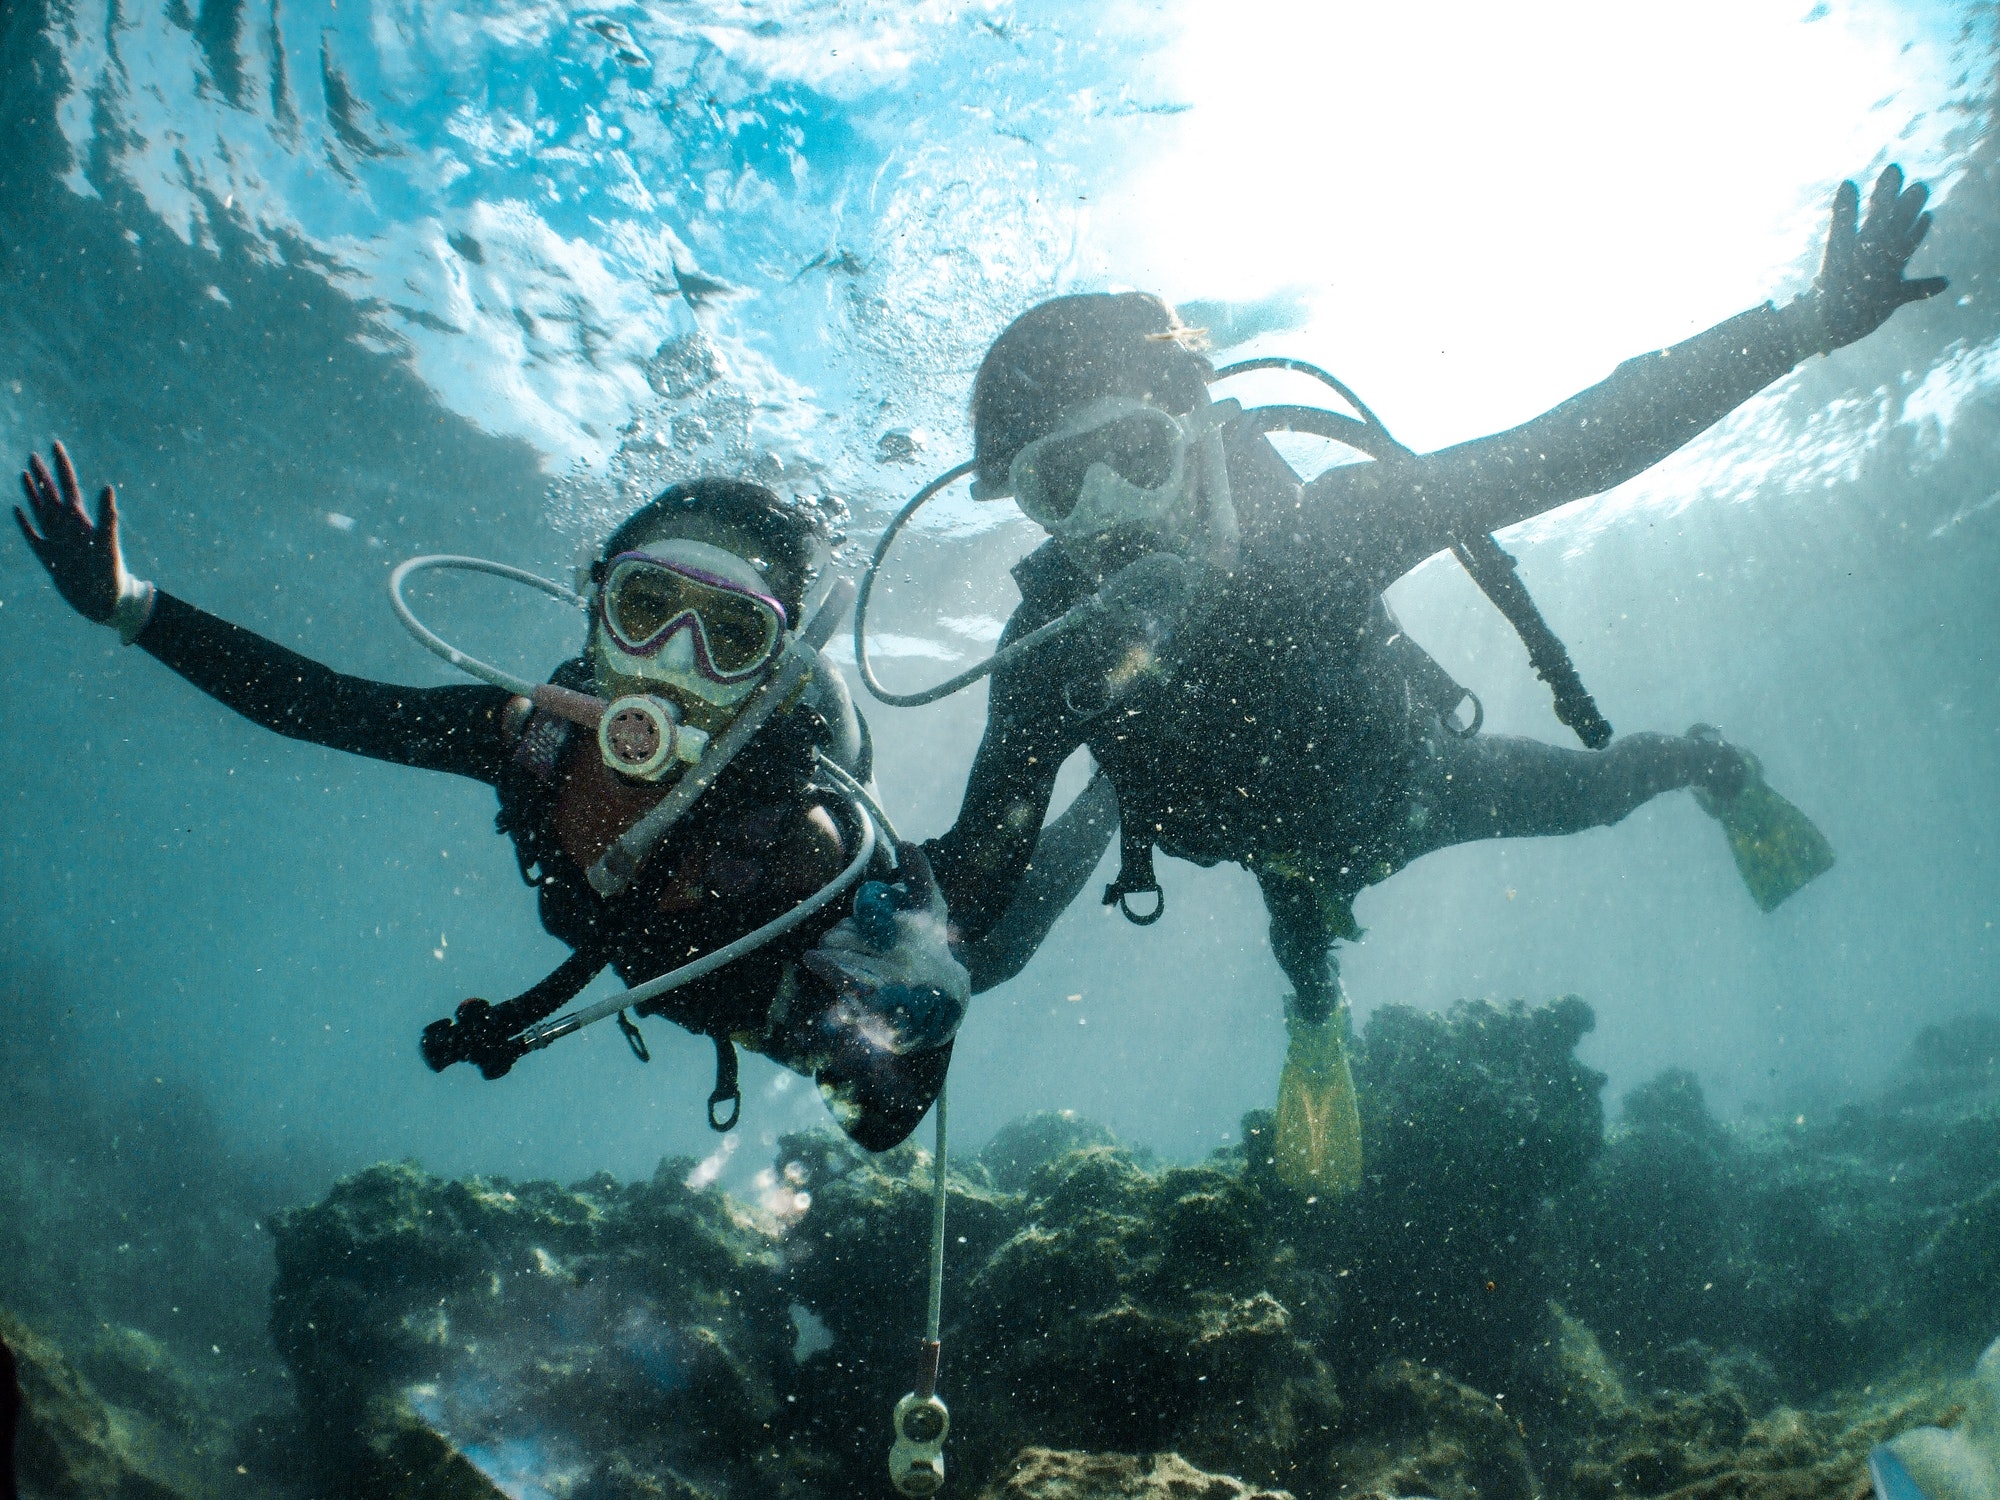 Underwater shot of two people diving